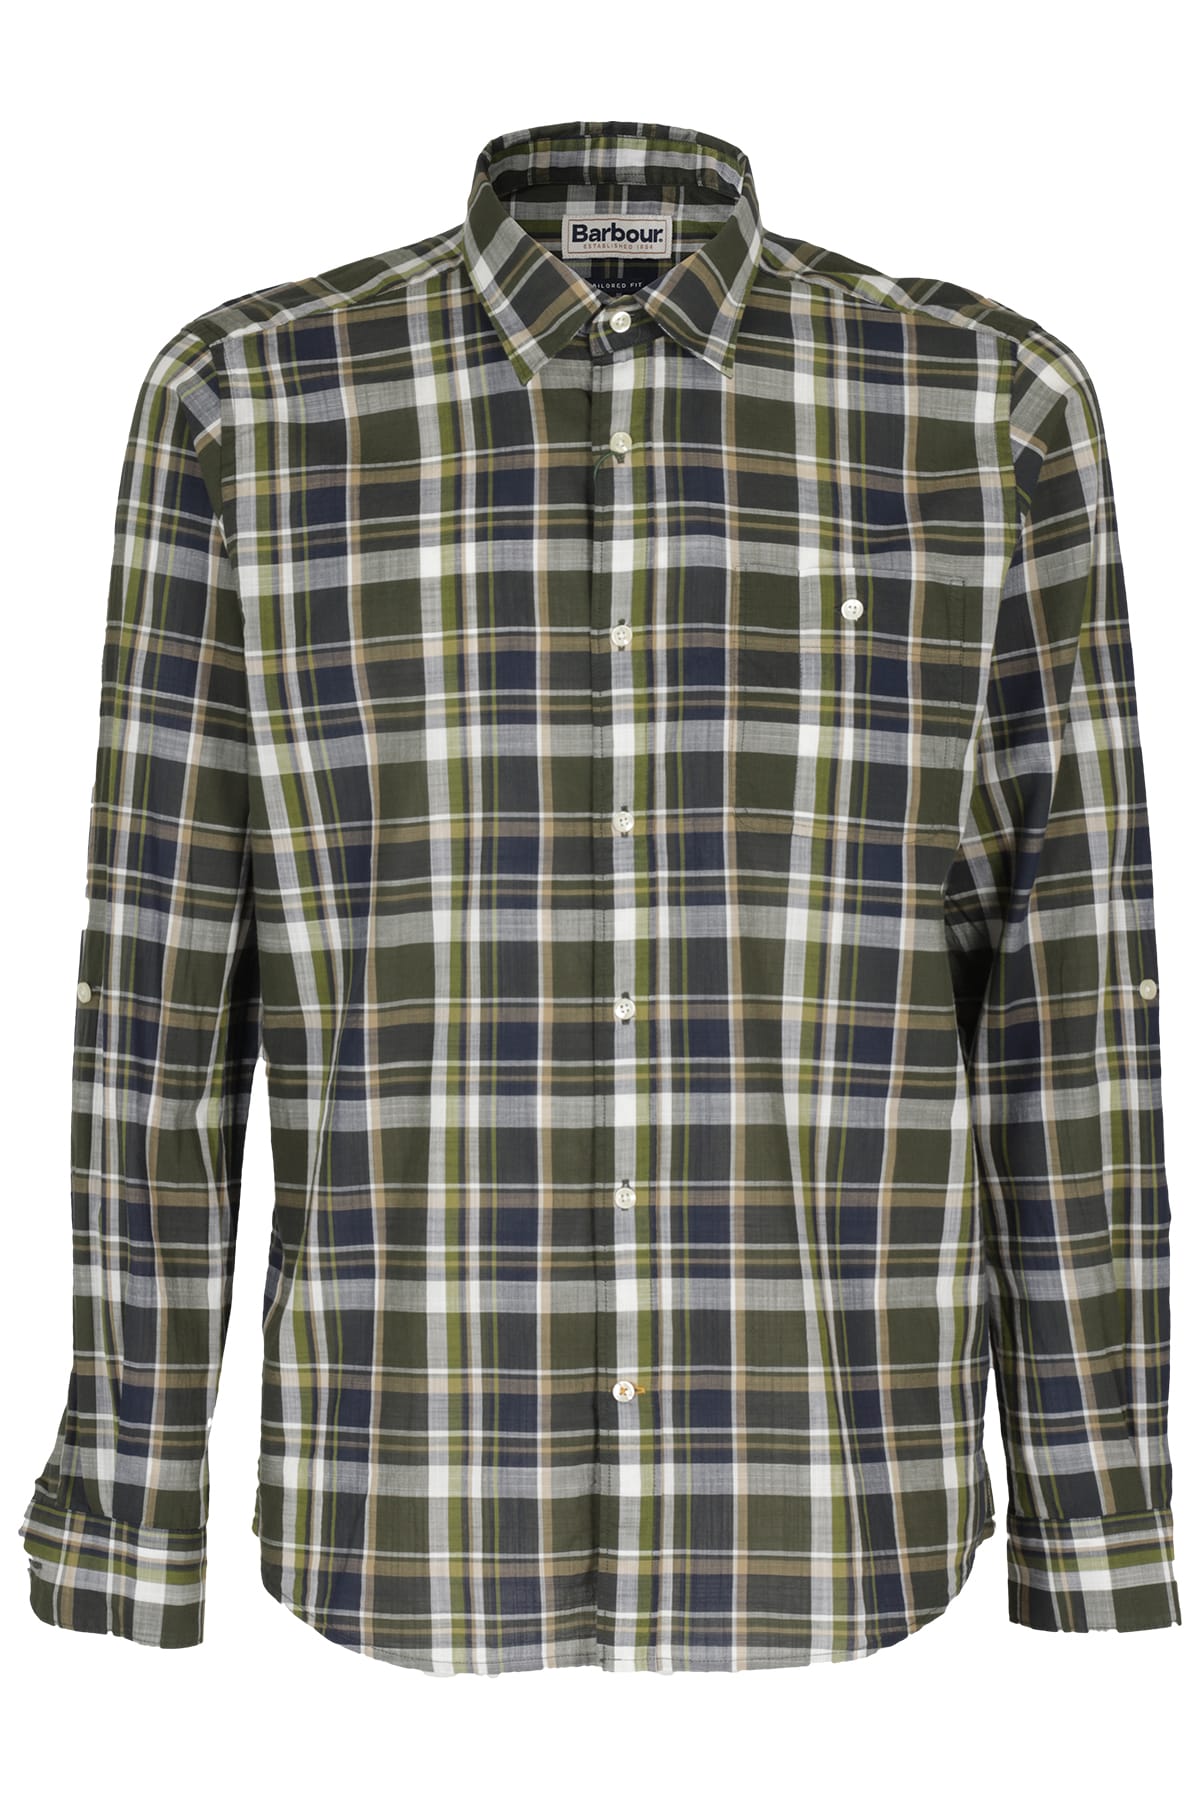 Barbour Wearside Tailored Shirt Check